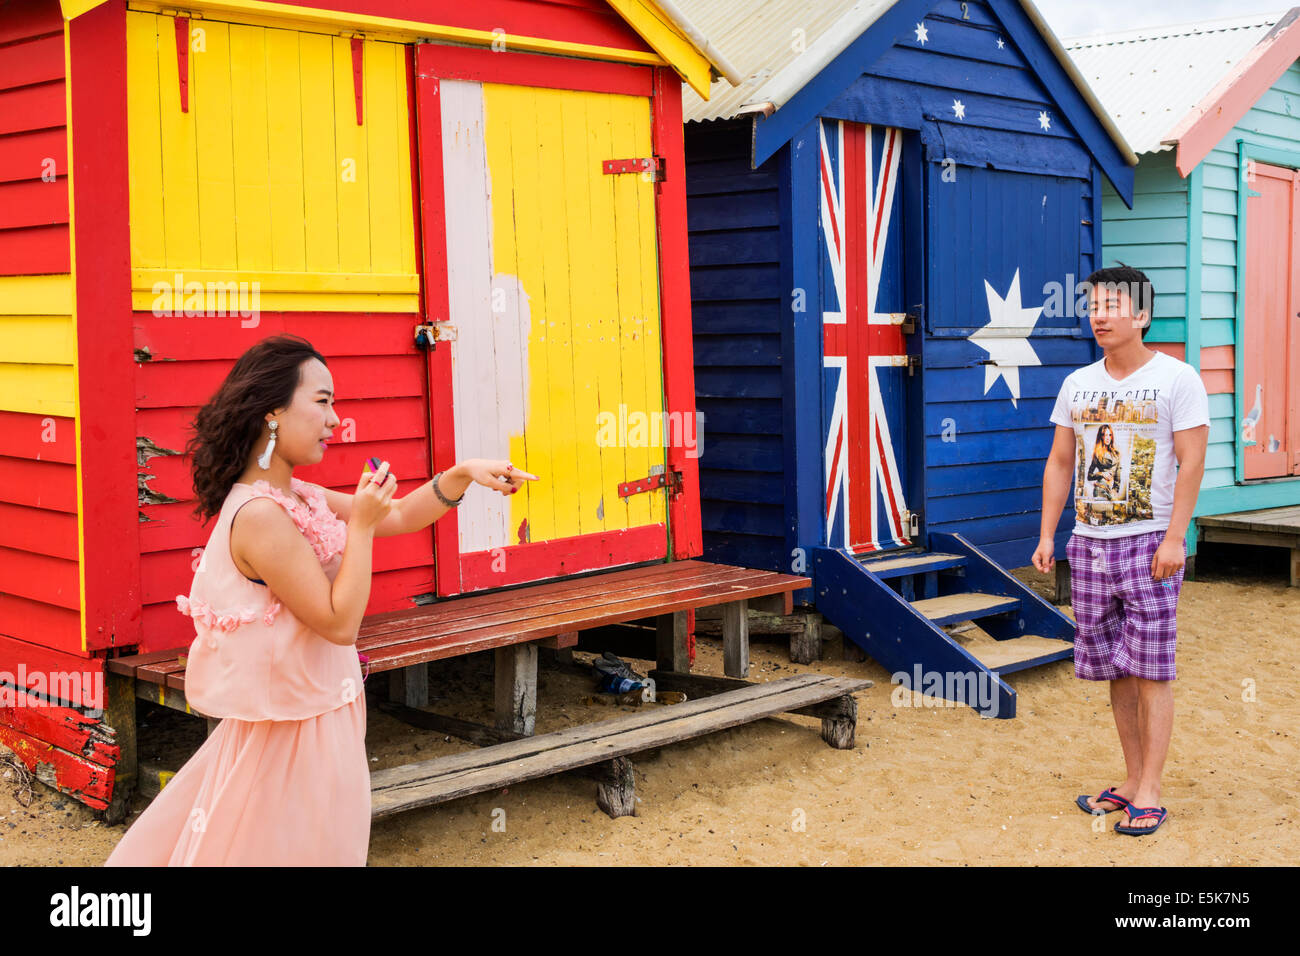 Melbourne Australia,Victoria Brighton Beach,bathing boxes,huts,cabins,colorful,Asian Asians ethnic immigrant immigrants minority,adult adults man men Stock Photo